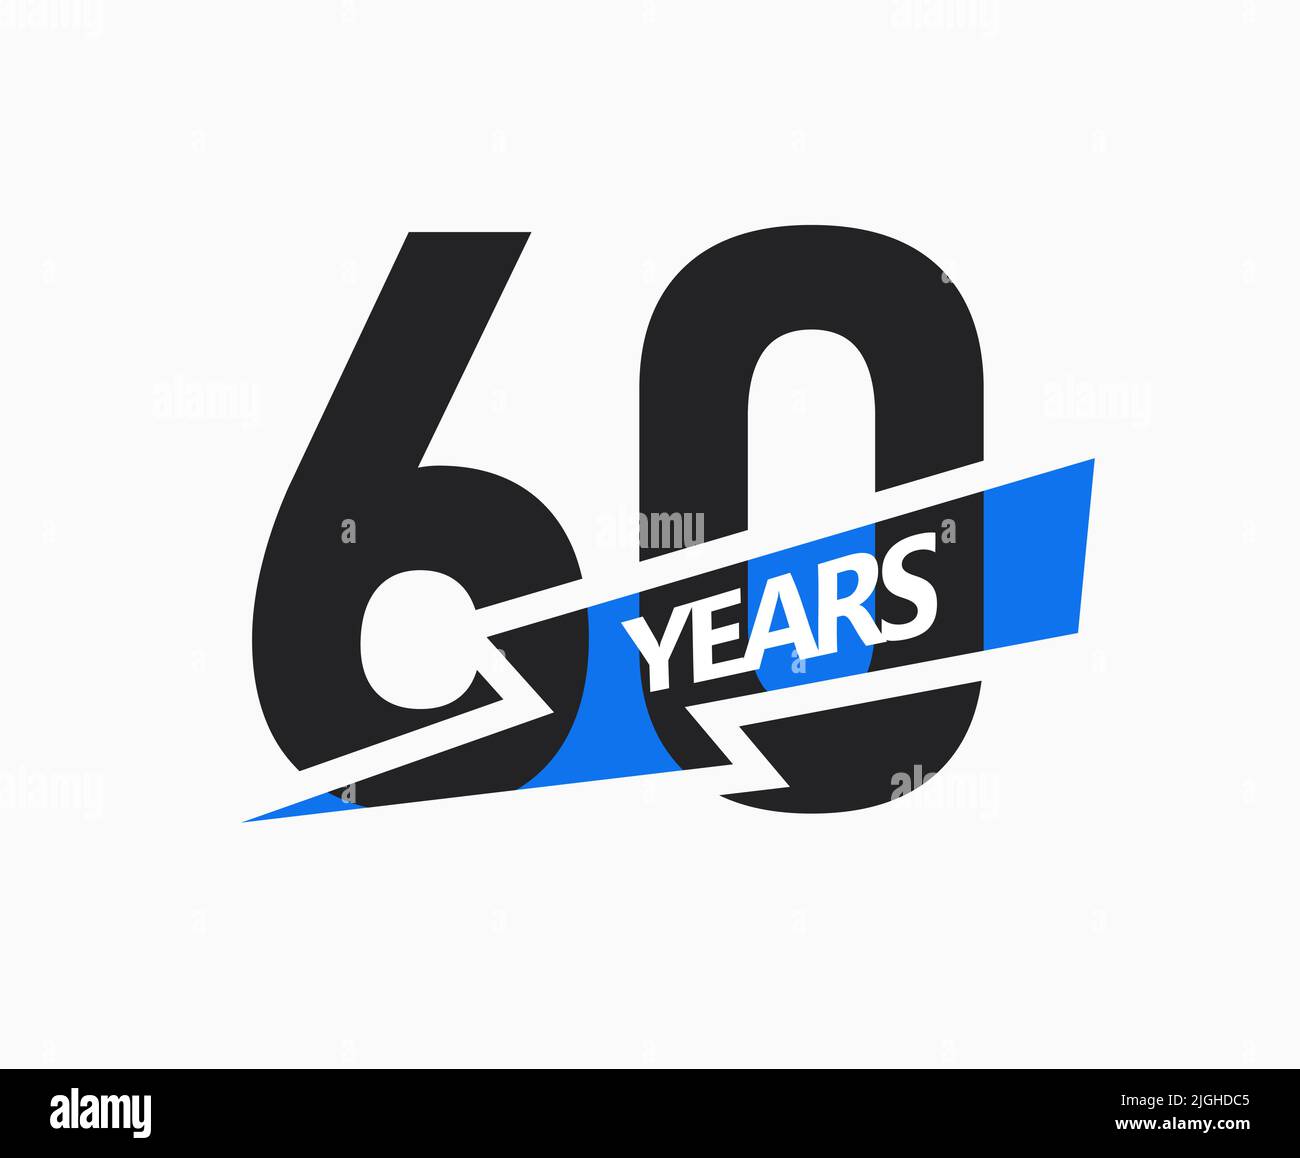 60 years of business, jubilee logo. 60th Anniversary sign. Modern graphic design for company birthday. Isolated vector illustration. Stock Vector